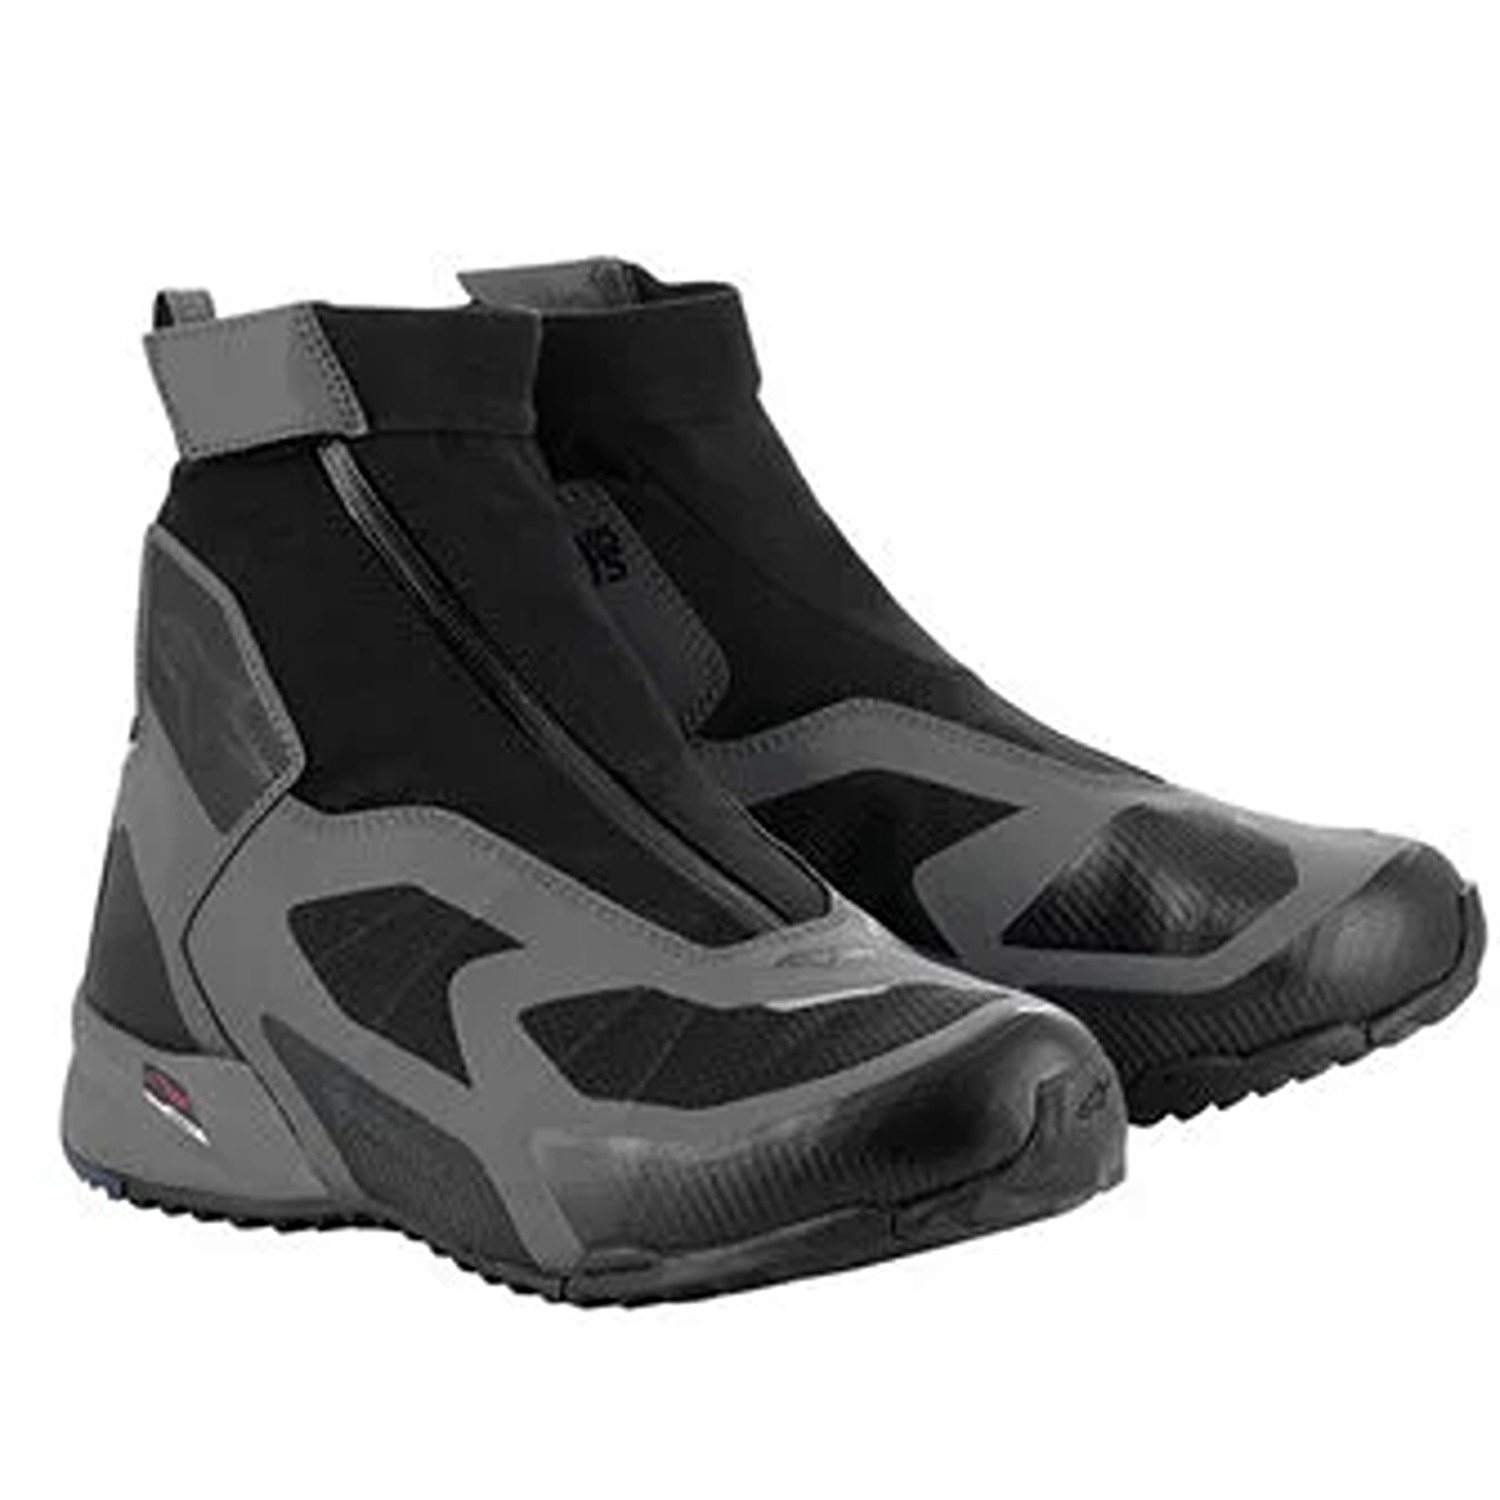 Image of Alpinestars CR-8 Gore-Tex Shoes Black Mid Gray Bright Red Size US 115 EN